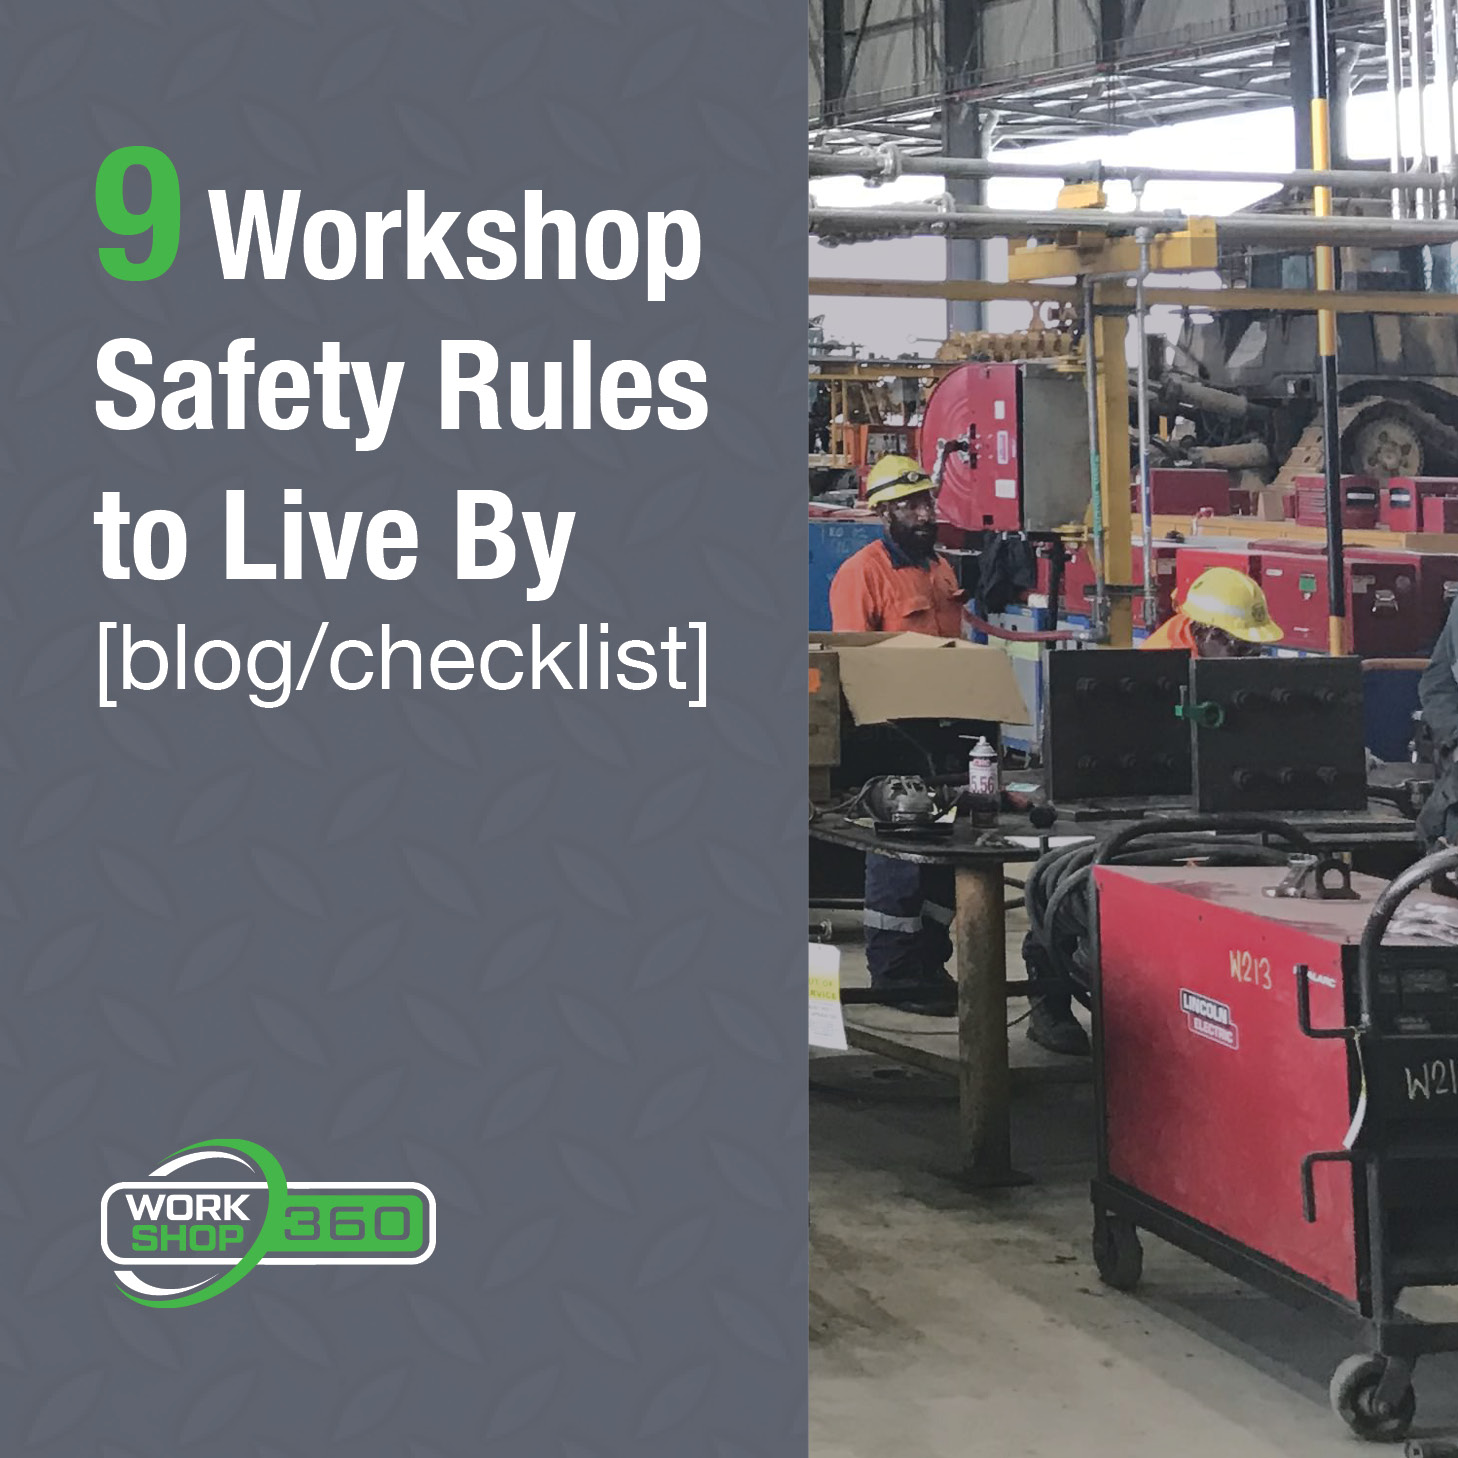  9 Workshop Safety Rules to Live By